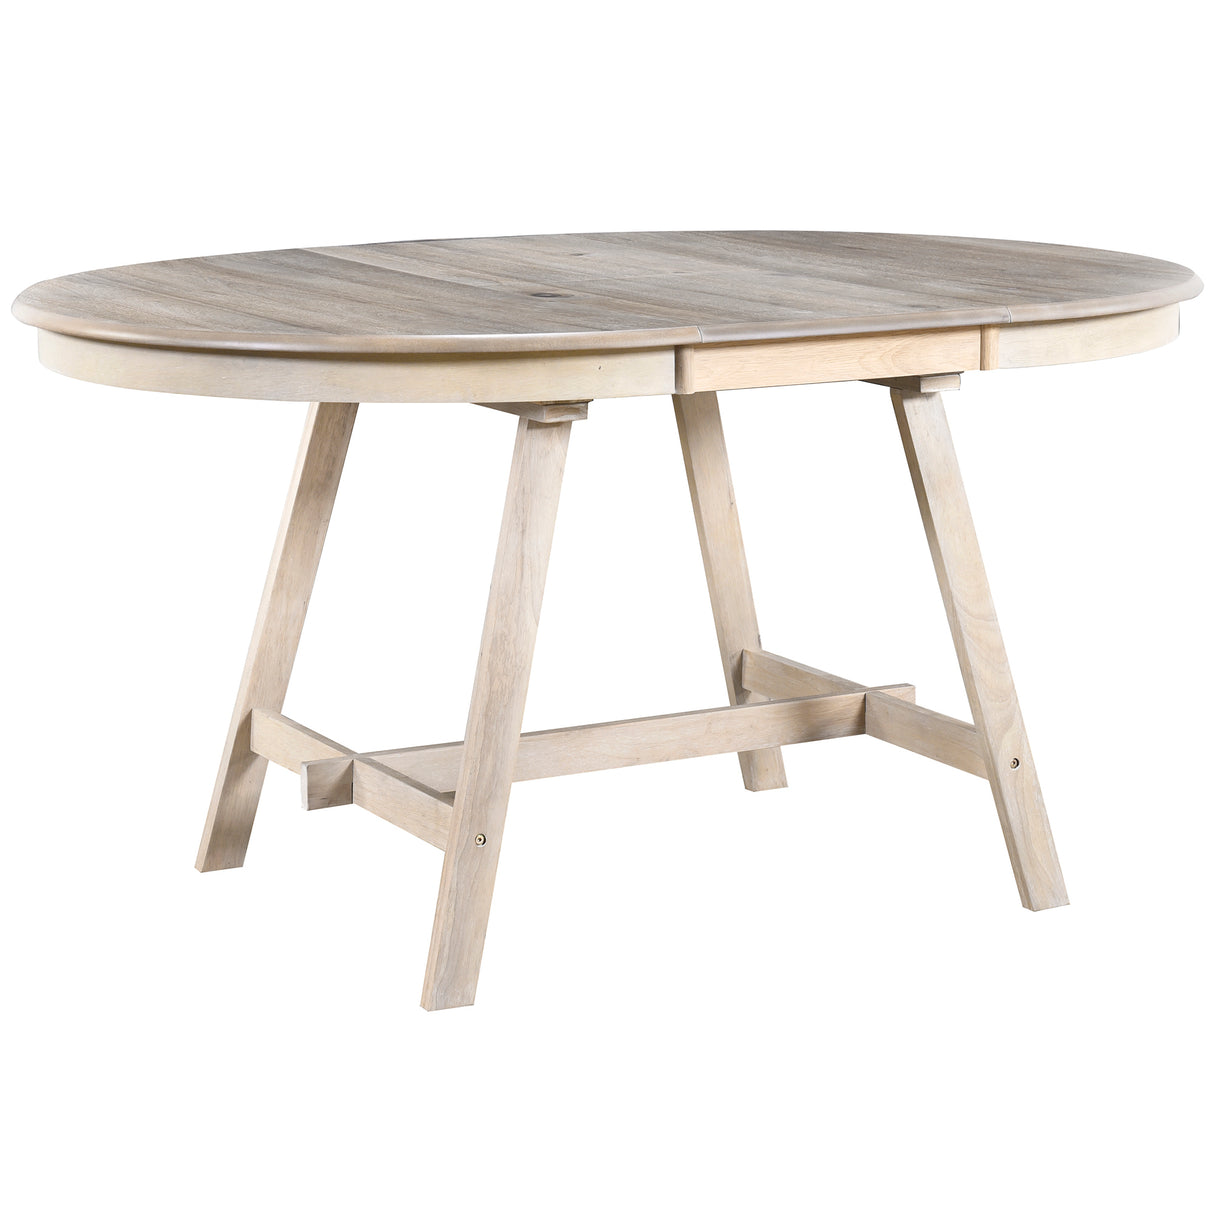 TREXM Wood Dining Table Round Extendable Dining Table for Dining Room (Natural Wood Wash) - Home Elegance USA